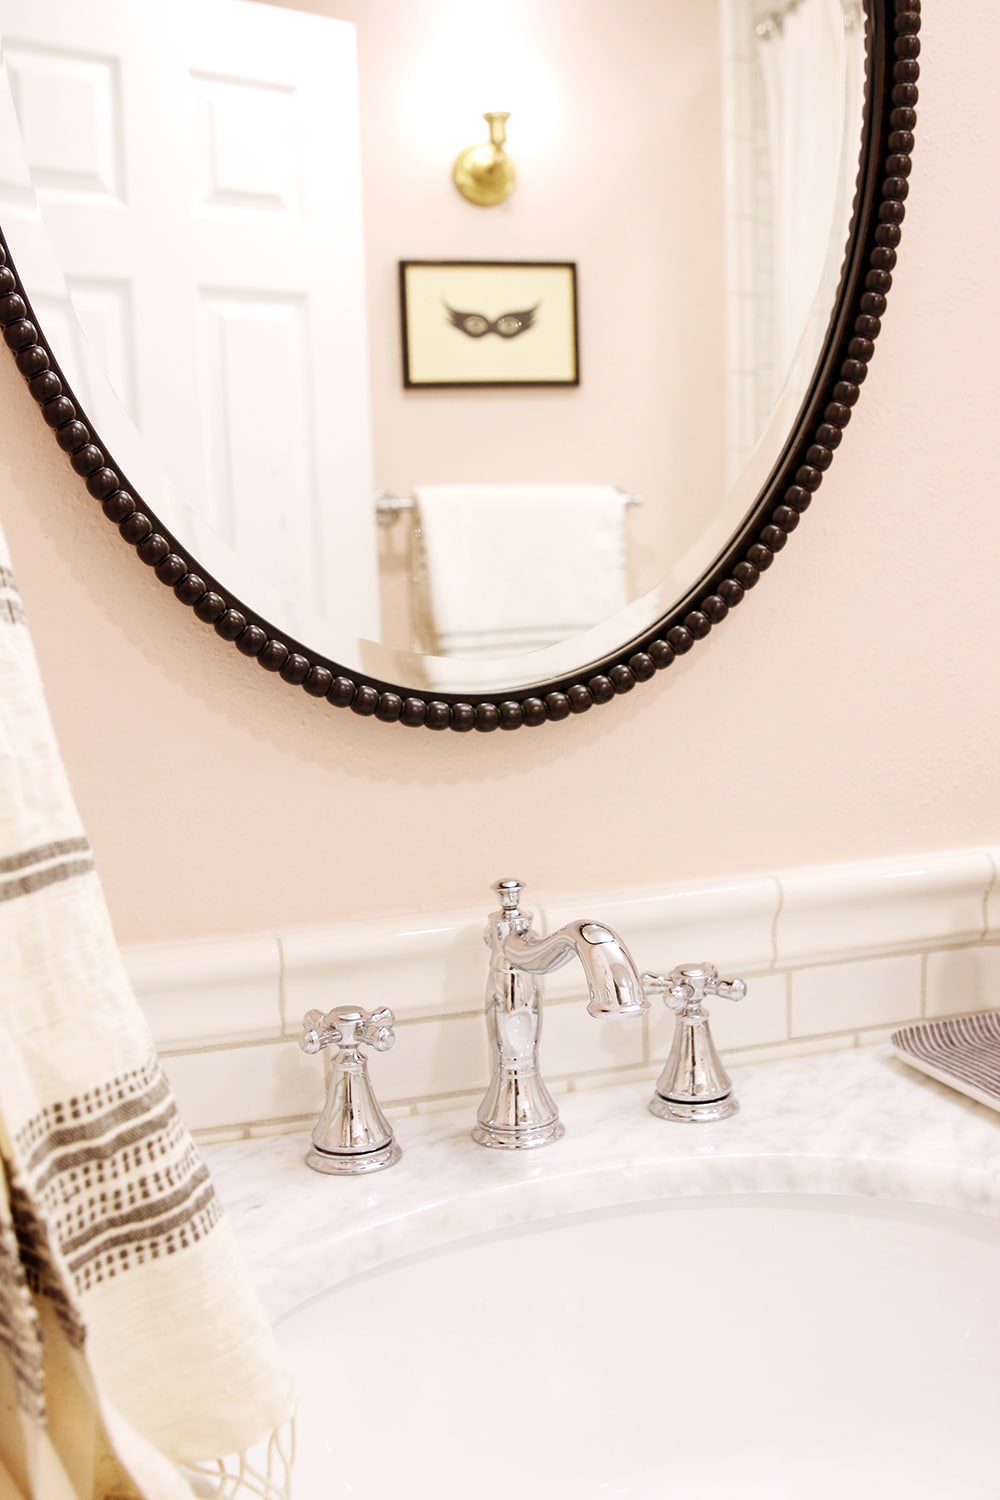 Bathroom Hardware and Bathroom Accessories, Is There a Difference?